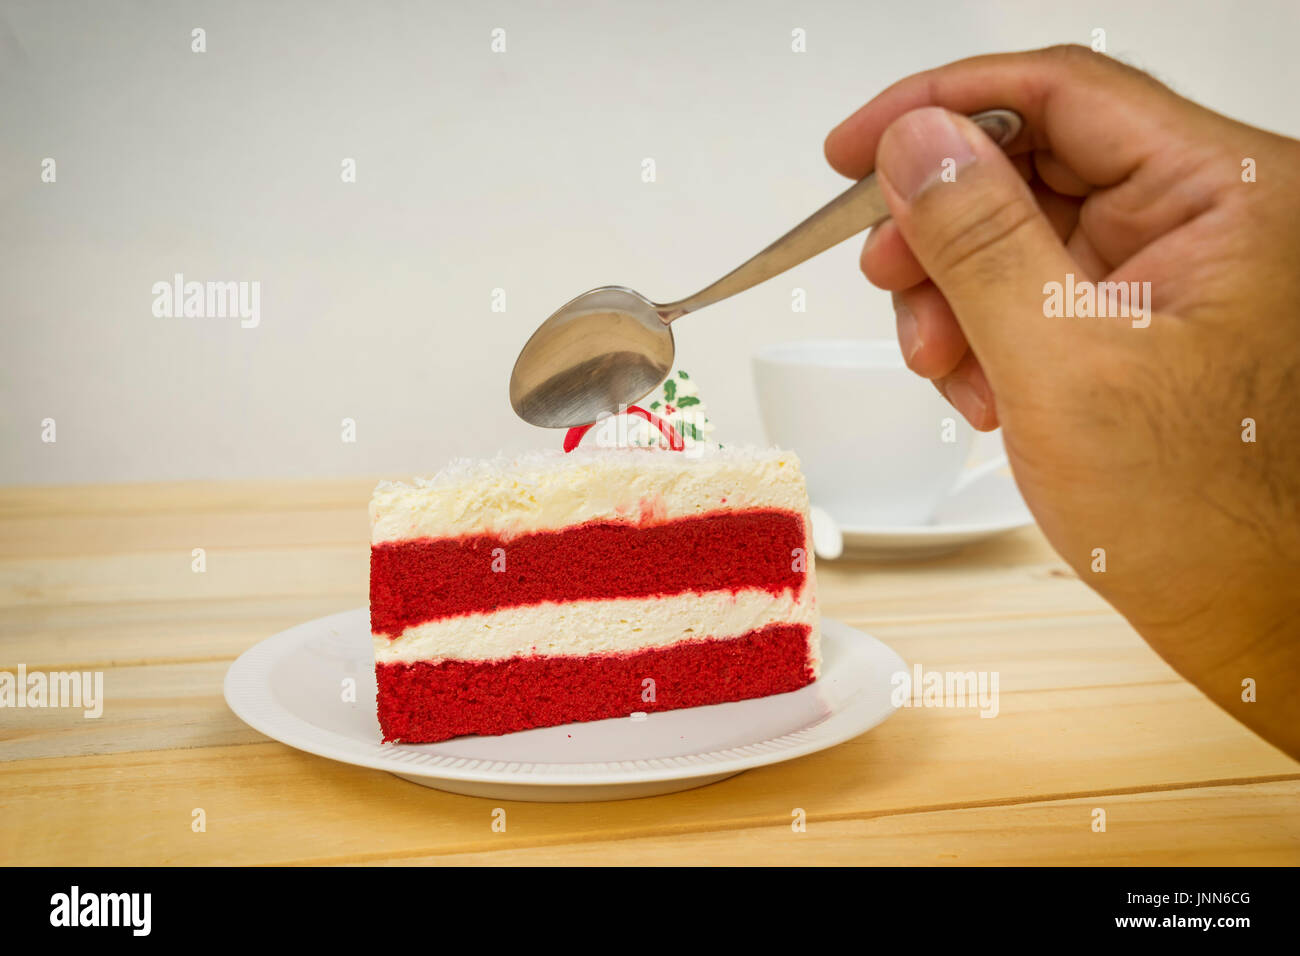 scene-of-red-velvet-cake-and-spoon-on-hand-and-wood-table-can-use-JNN6CG.jpg